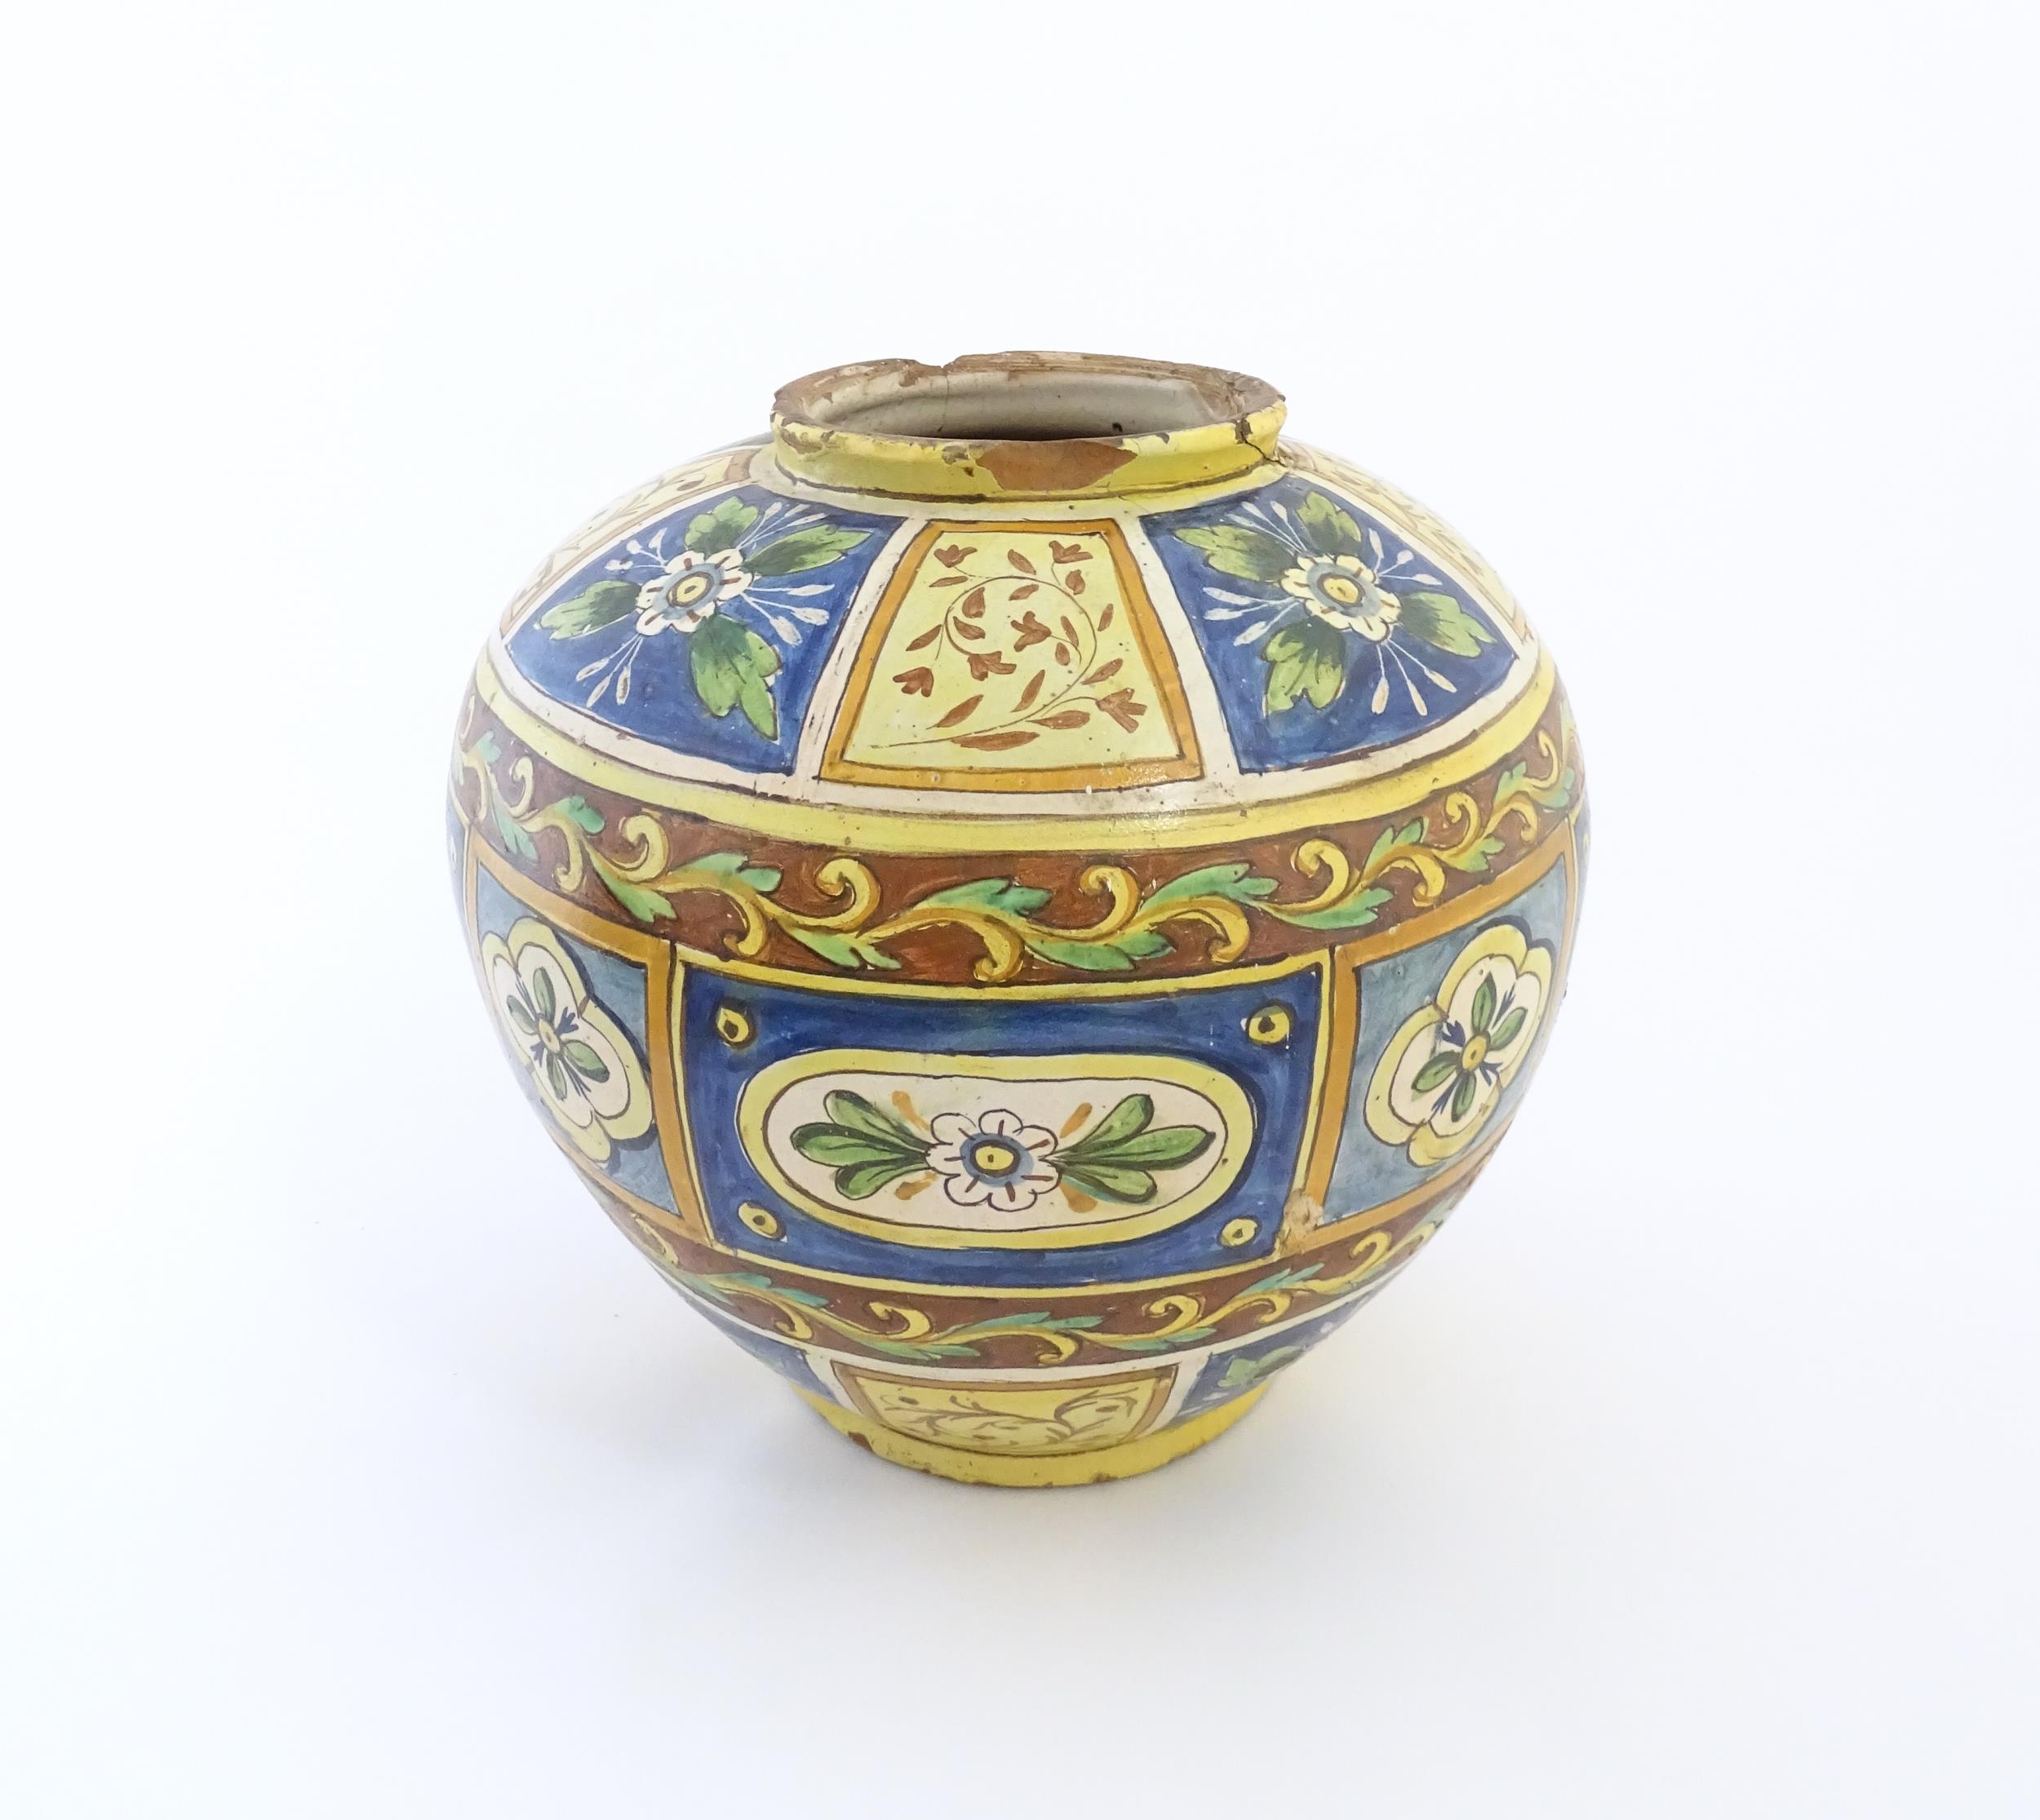 A Sicilian maiolica Bombola vase with panelled and banded decoration depicting flowers and - Image 4 of 10